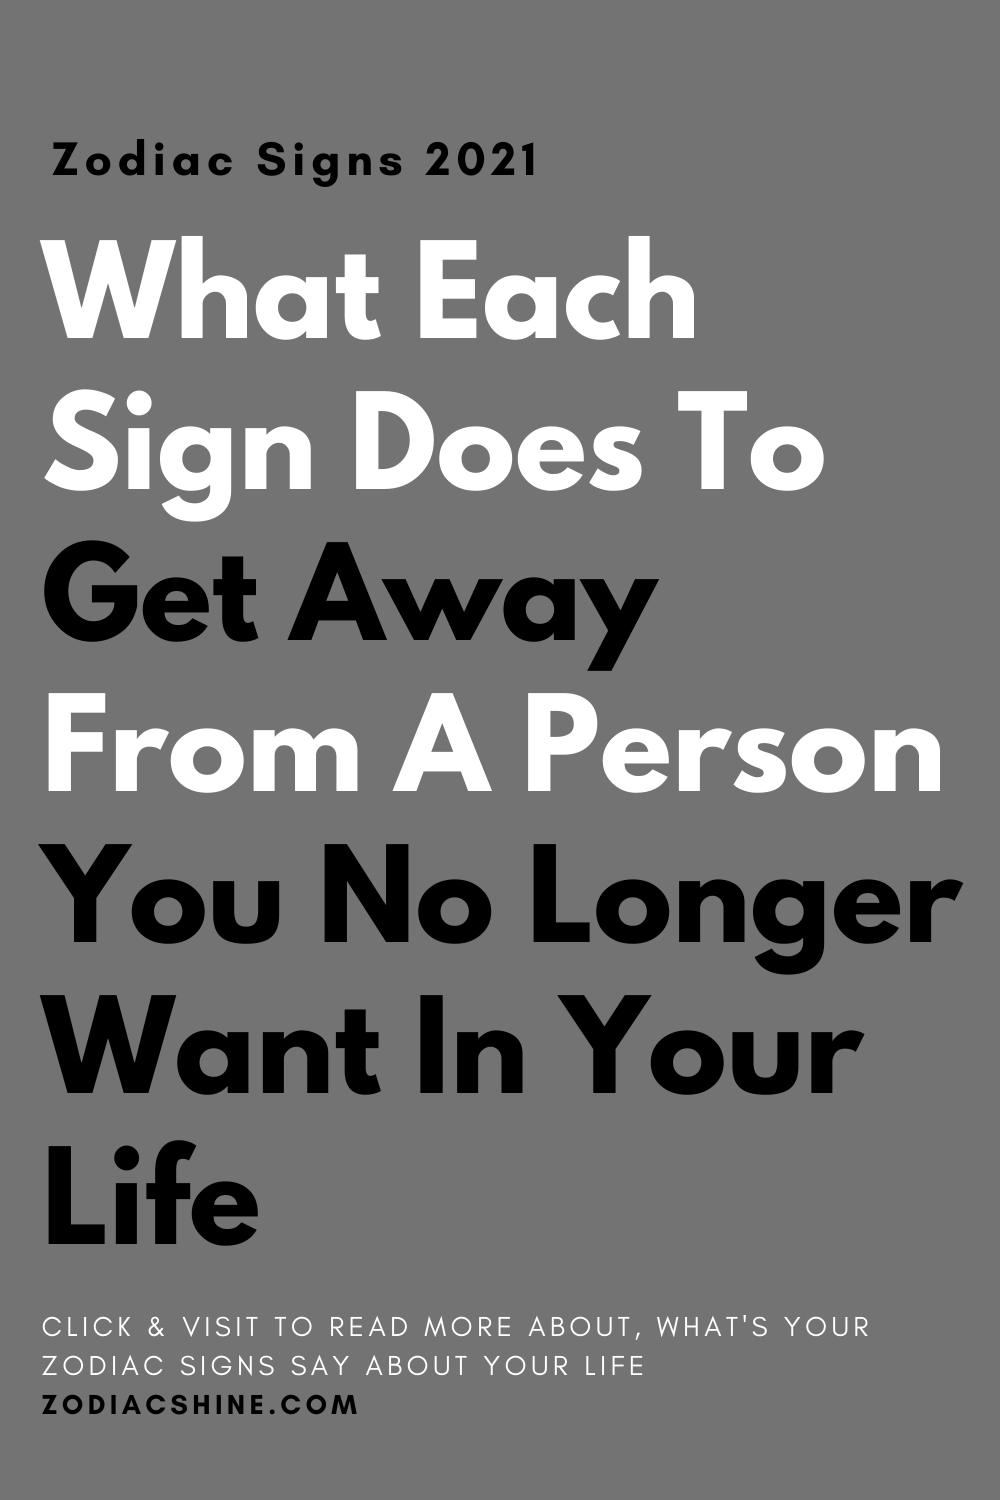 What Each Sign Does To Get Away From A Person You No Longer Want In Your Life